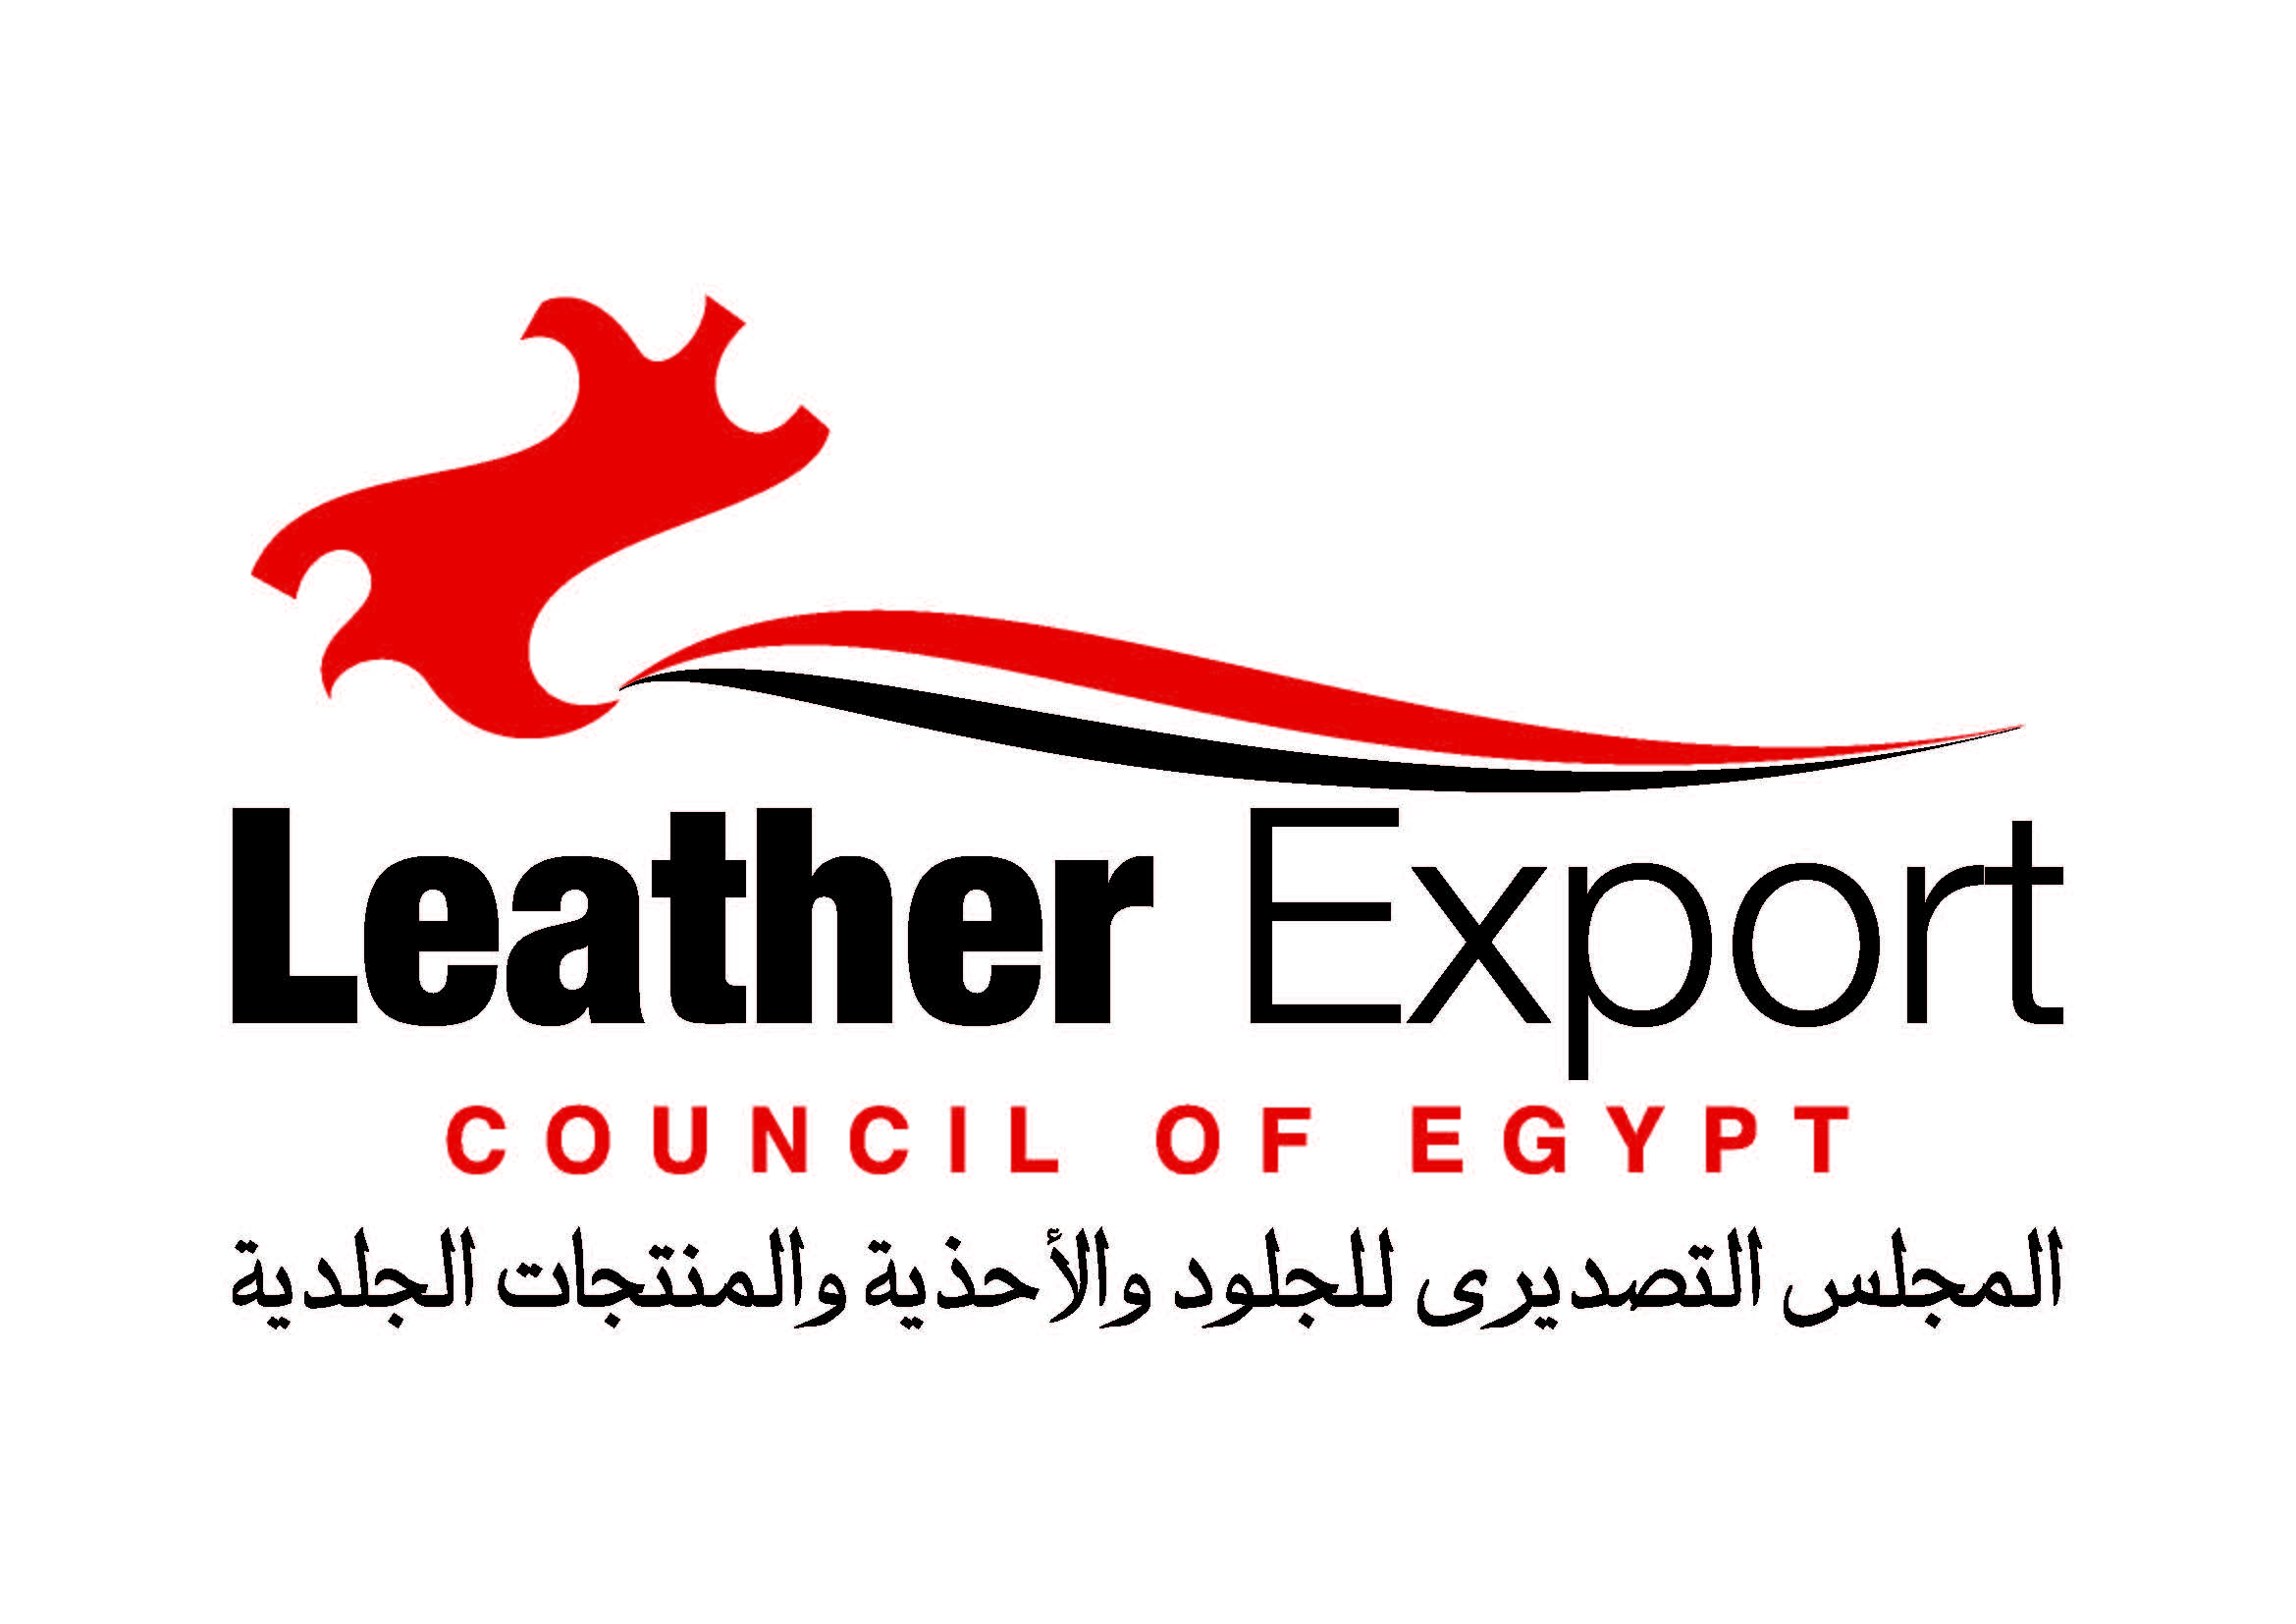 Leather Export Council of Egypt